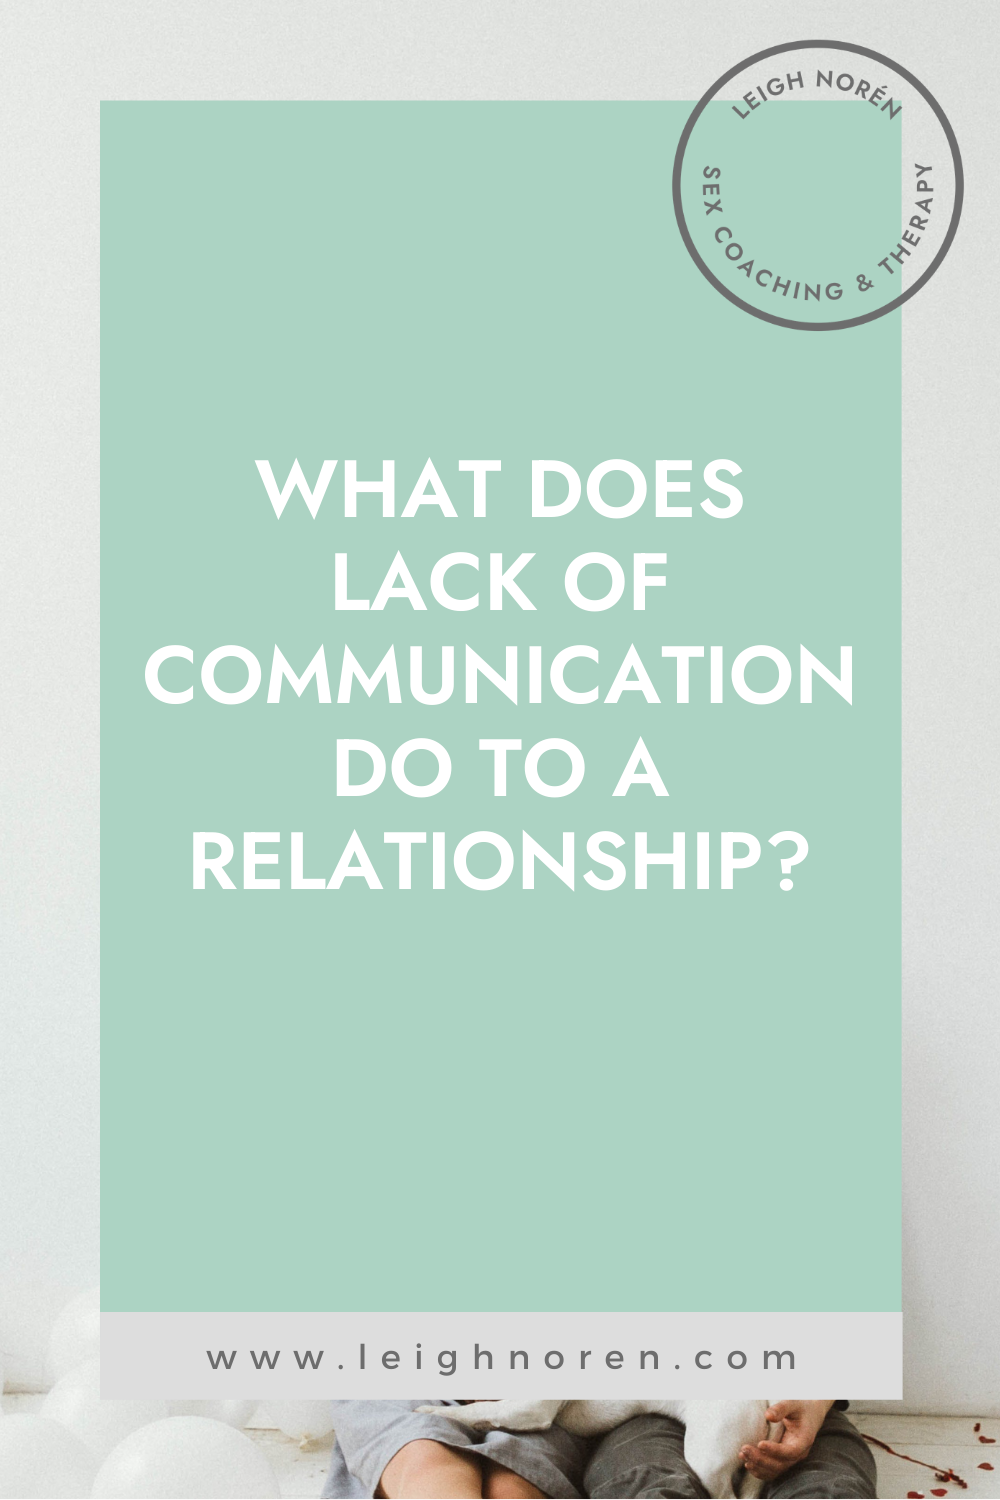 What Does Lack Of Communication Do To A Relationship?